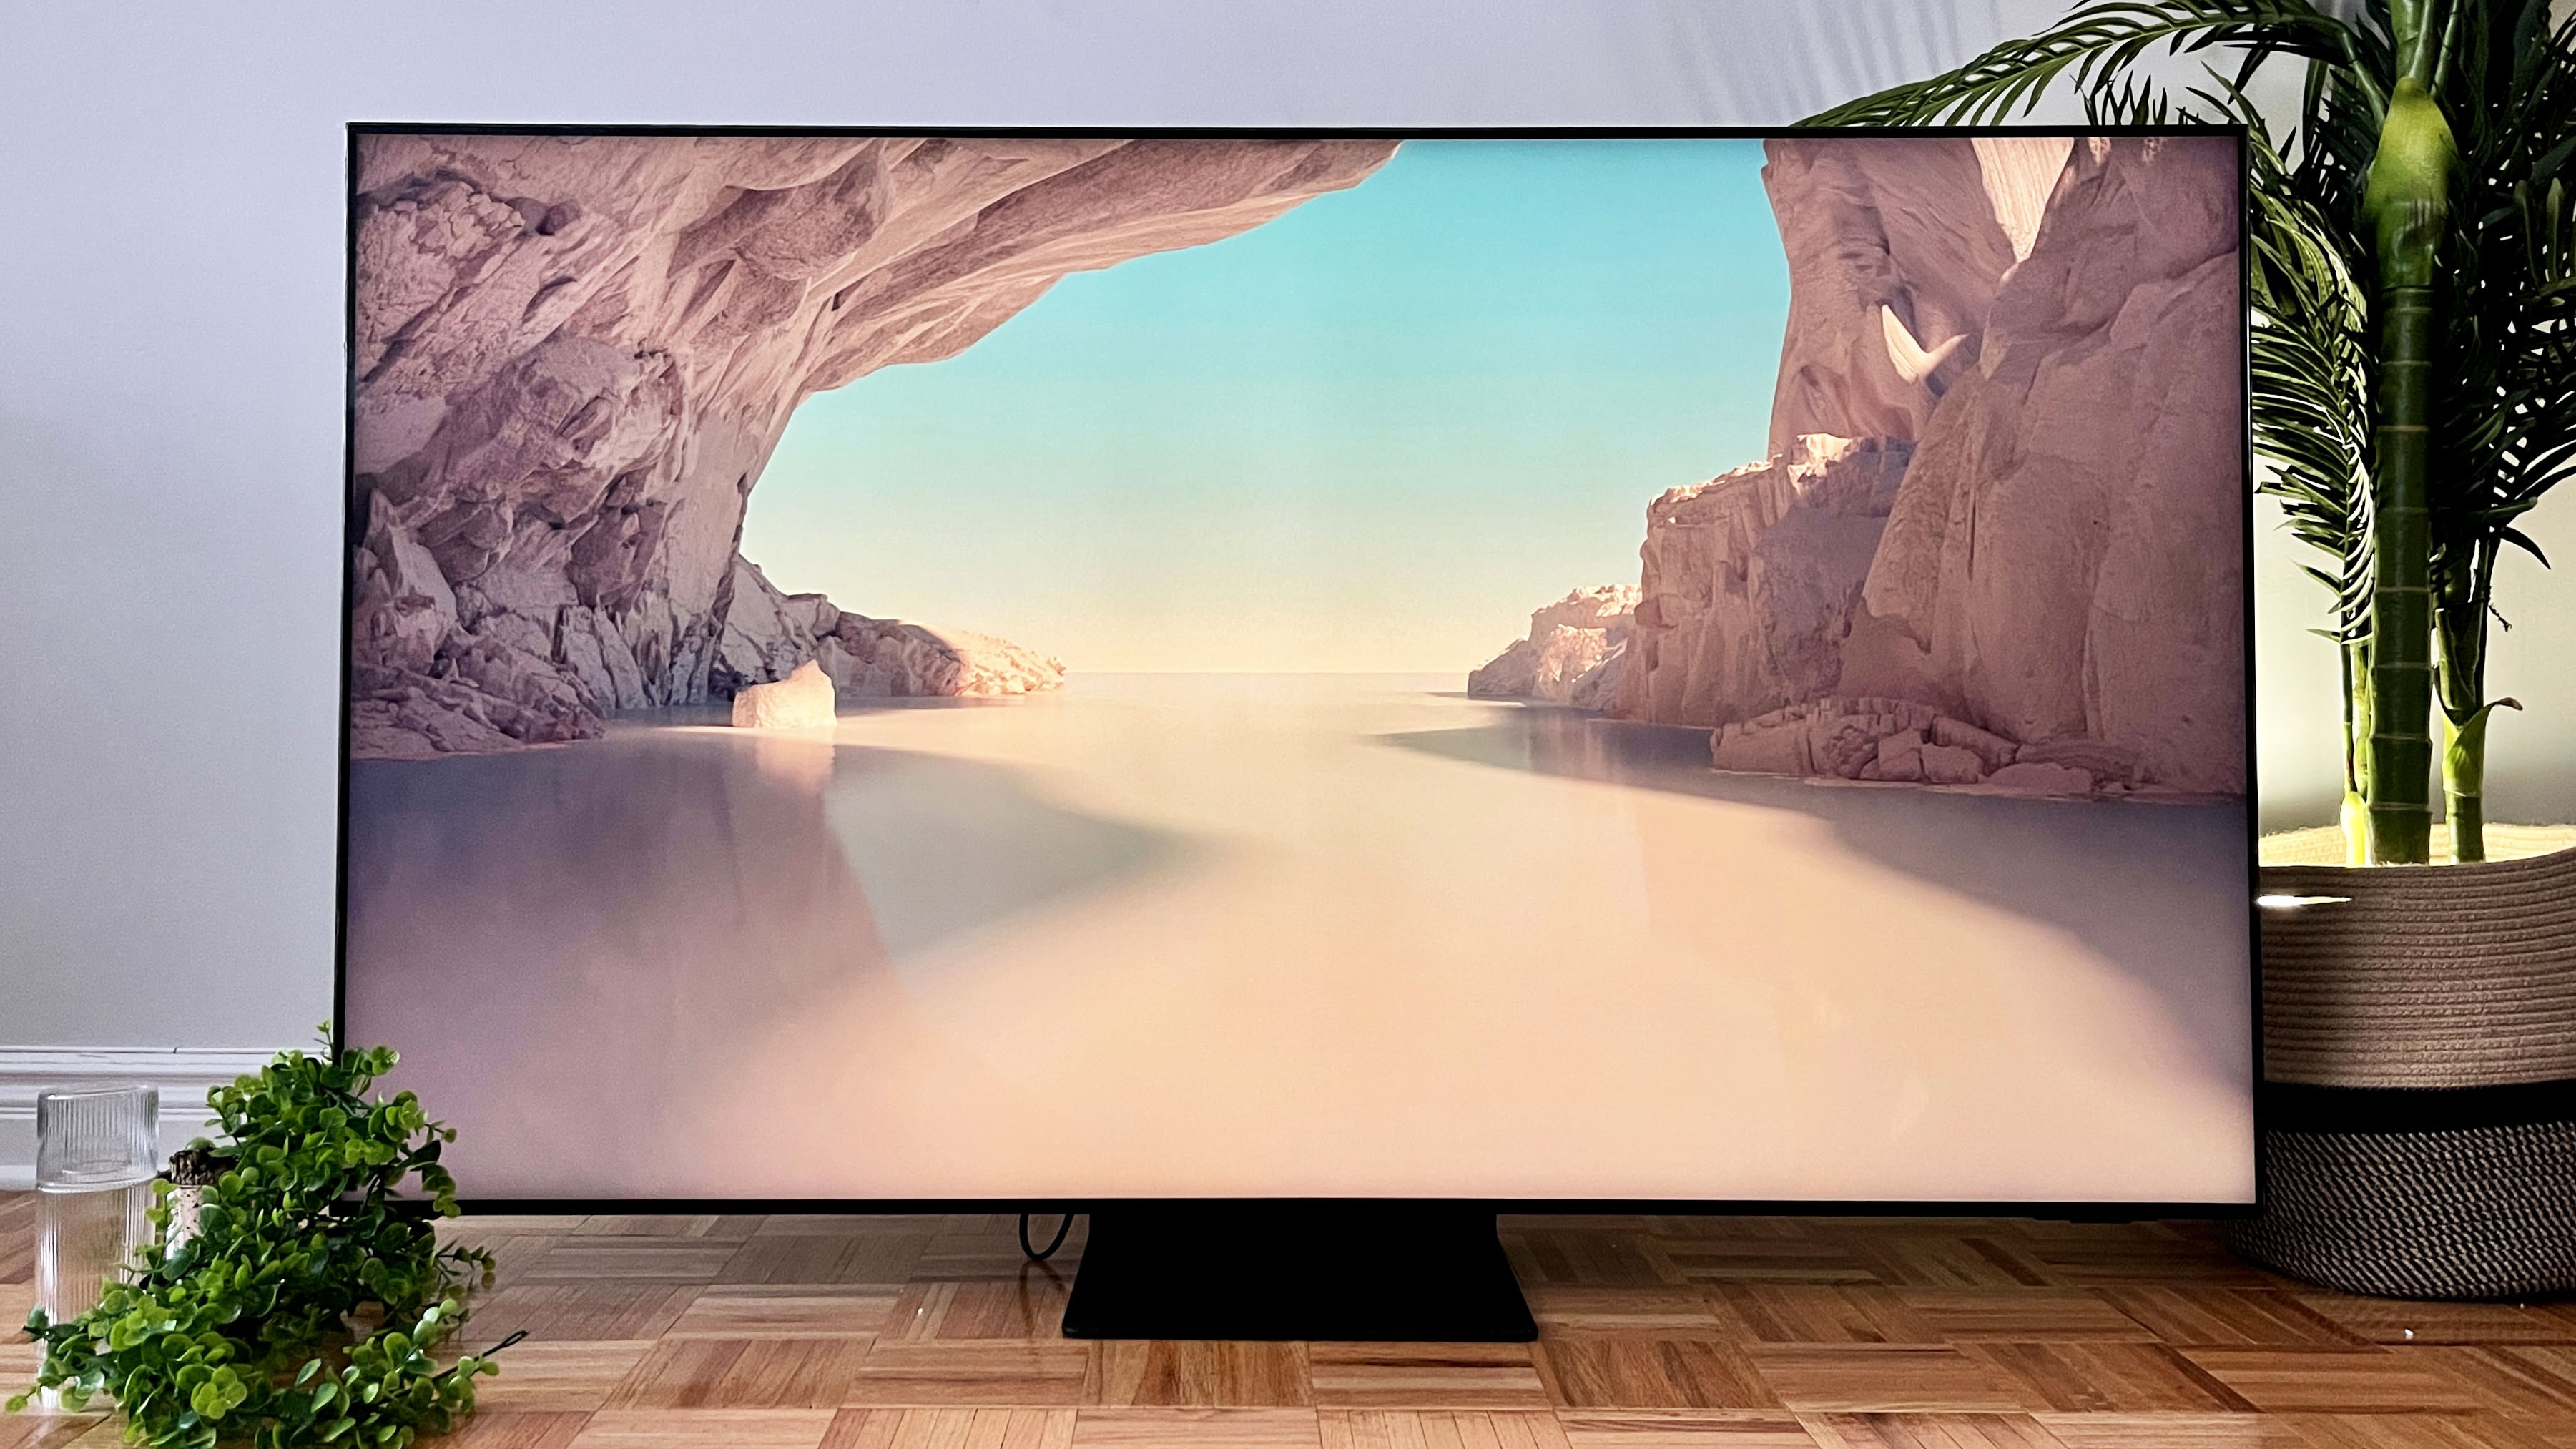 Samsung Qn90a Neo Qled Tv Review The King Of Qleds